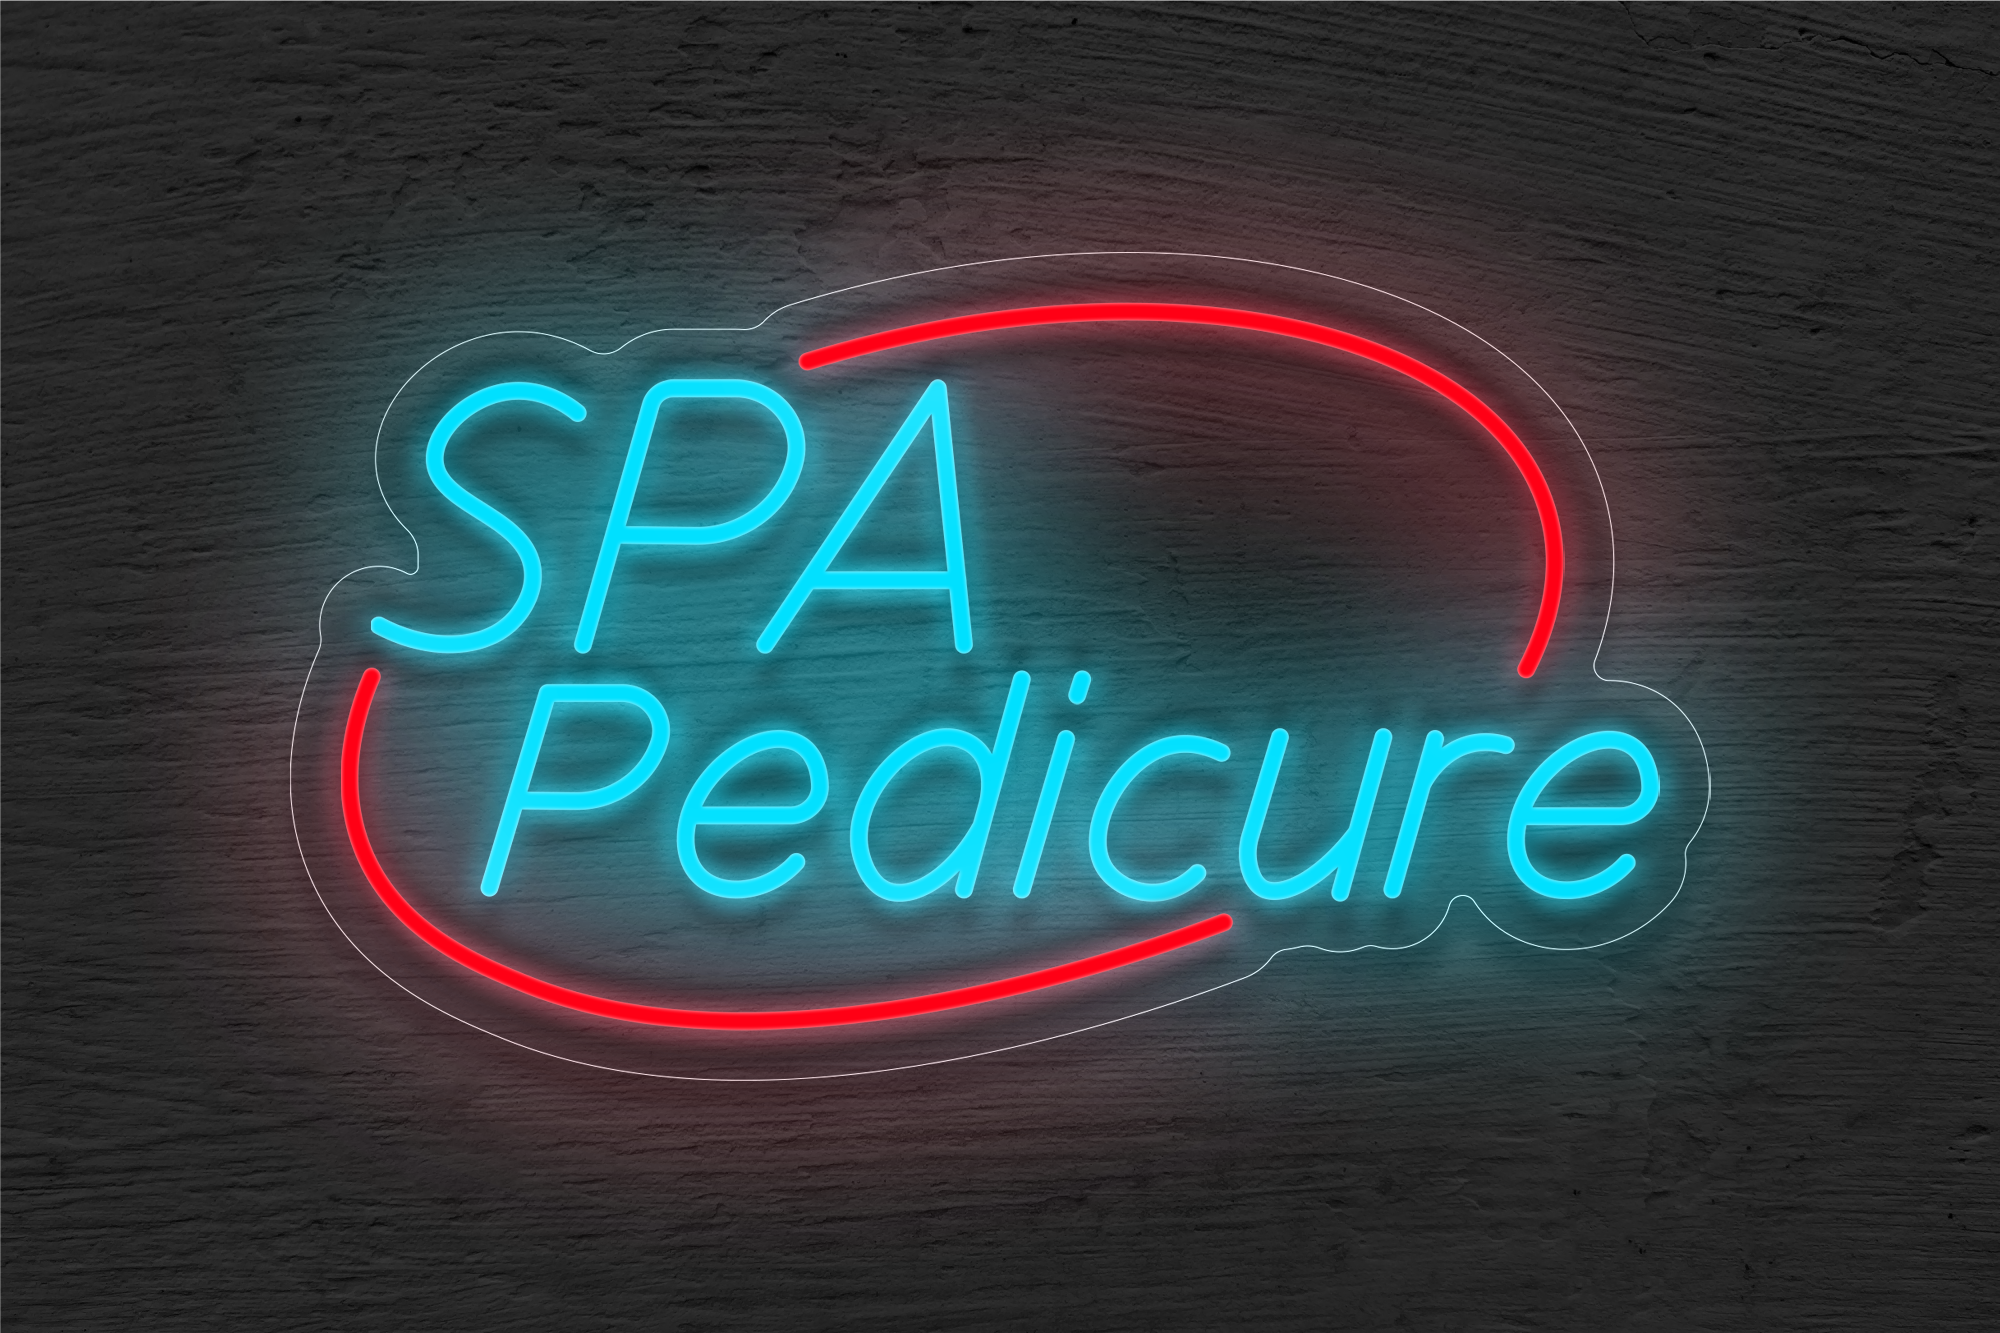 "Spa Pedicure" with Arc Border LED Neon Sign